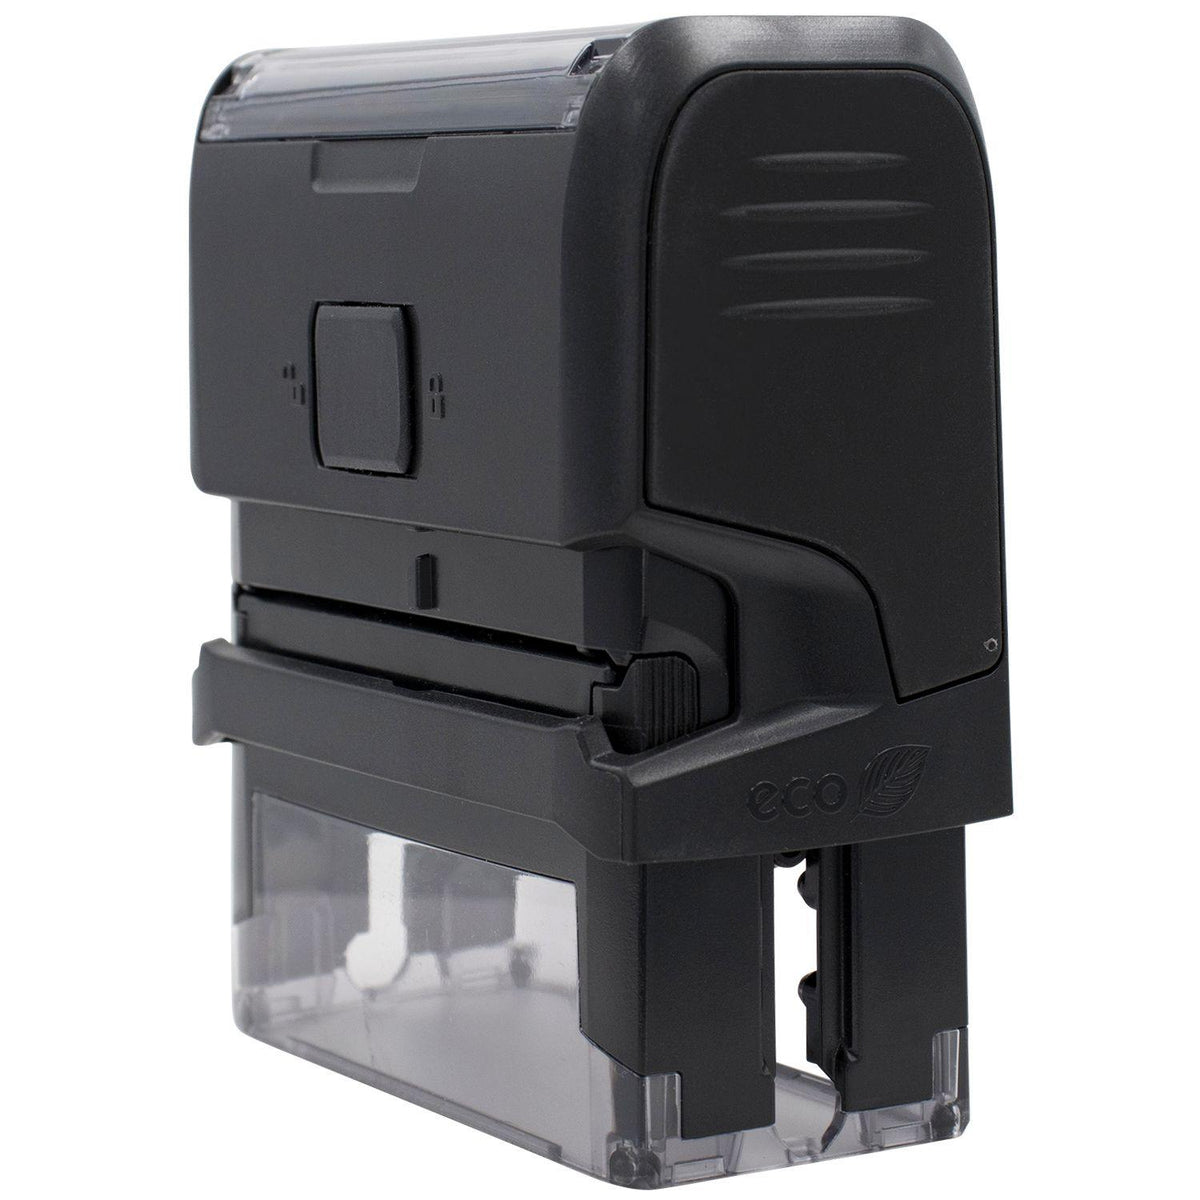 Side View of Large Self Inking Approved Stamp at an Angle